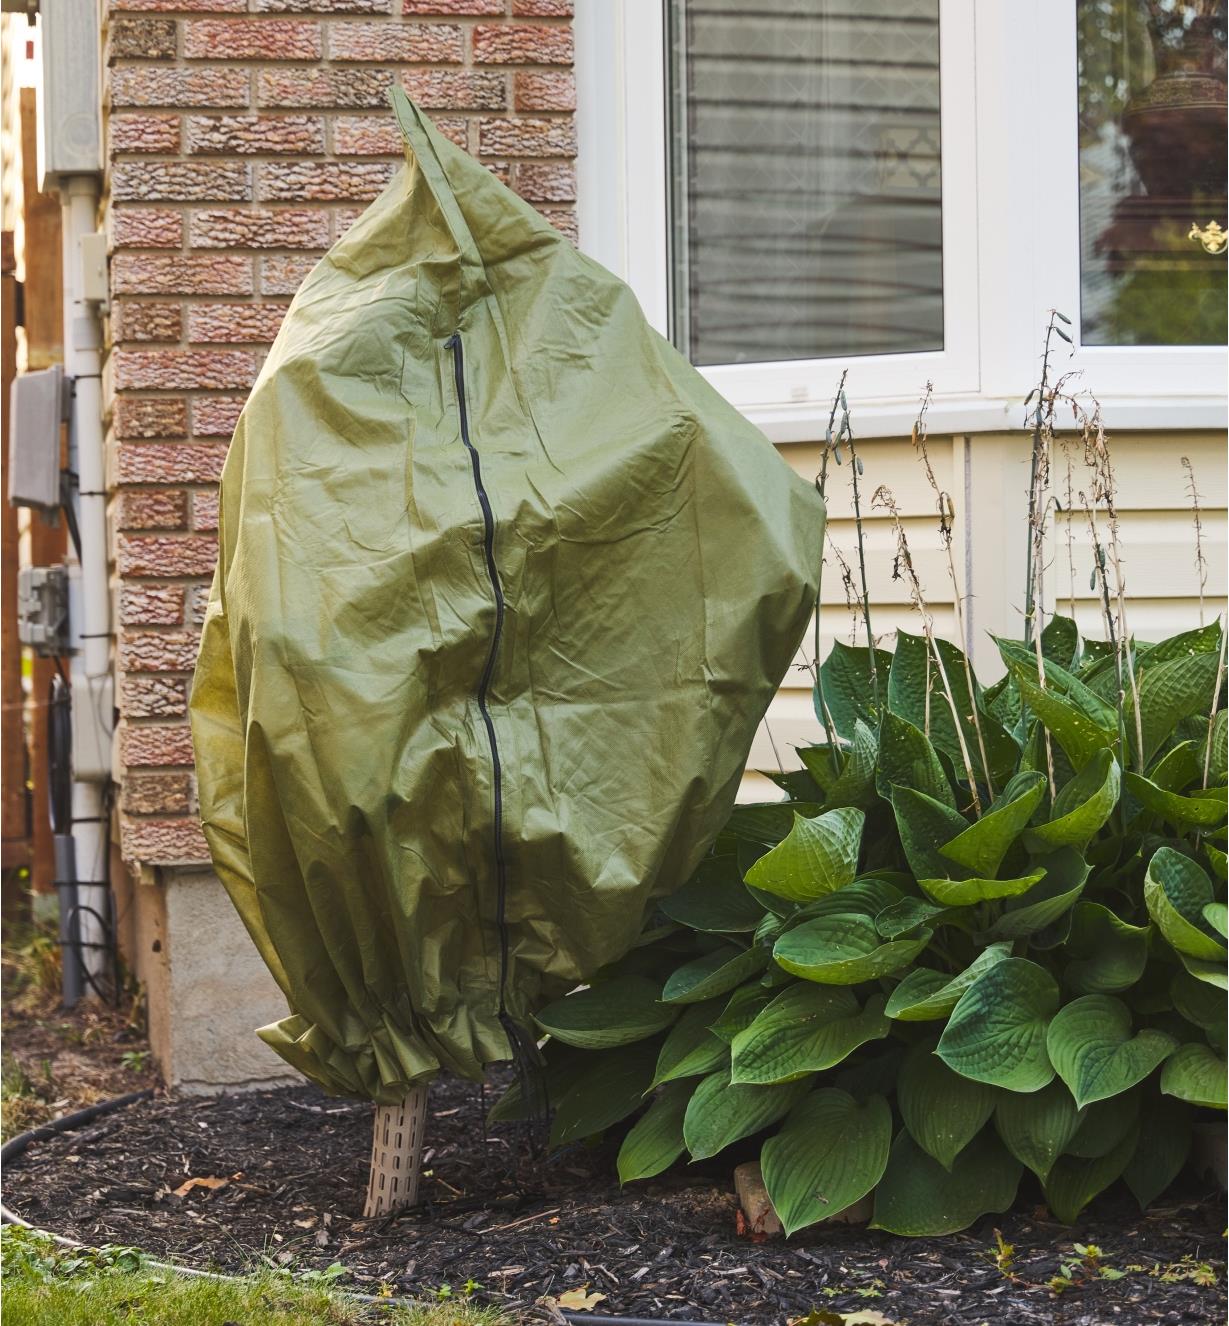 The Shrub & Potted Plant Protector covering a shrub in a garden